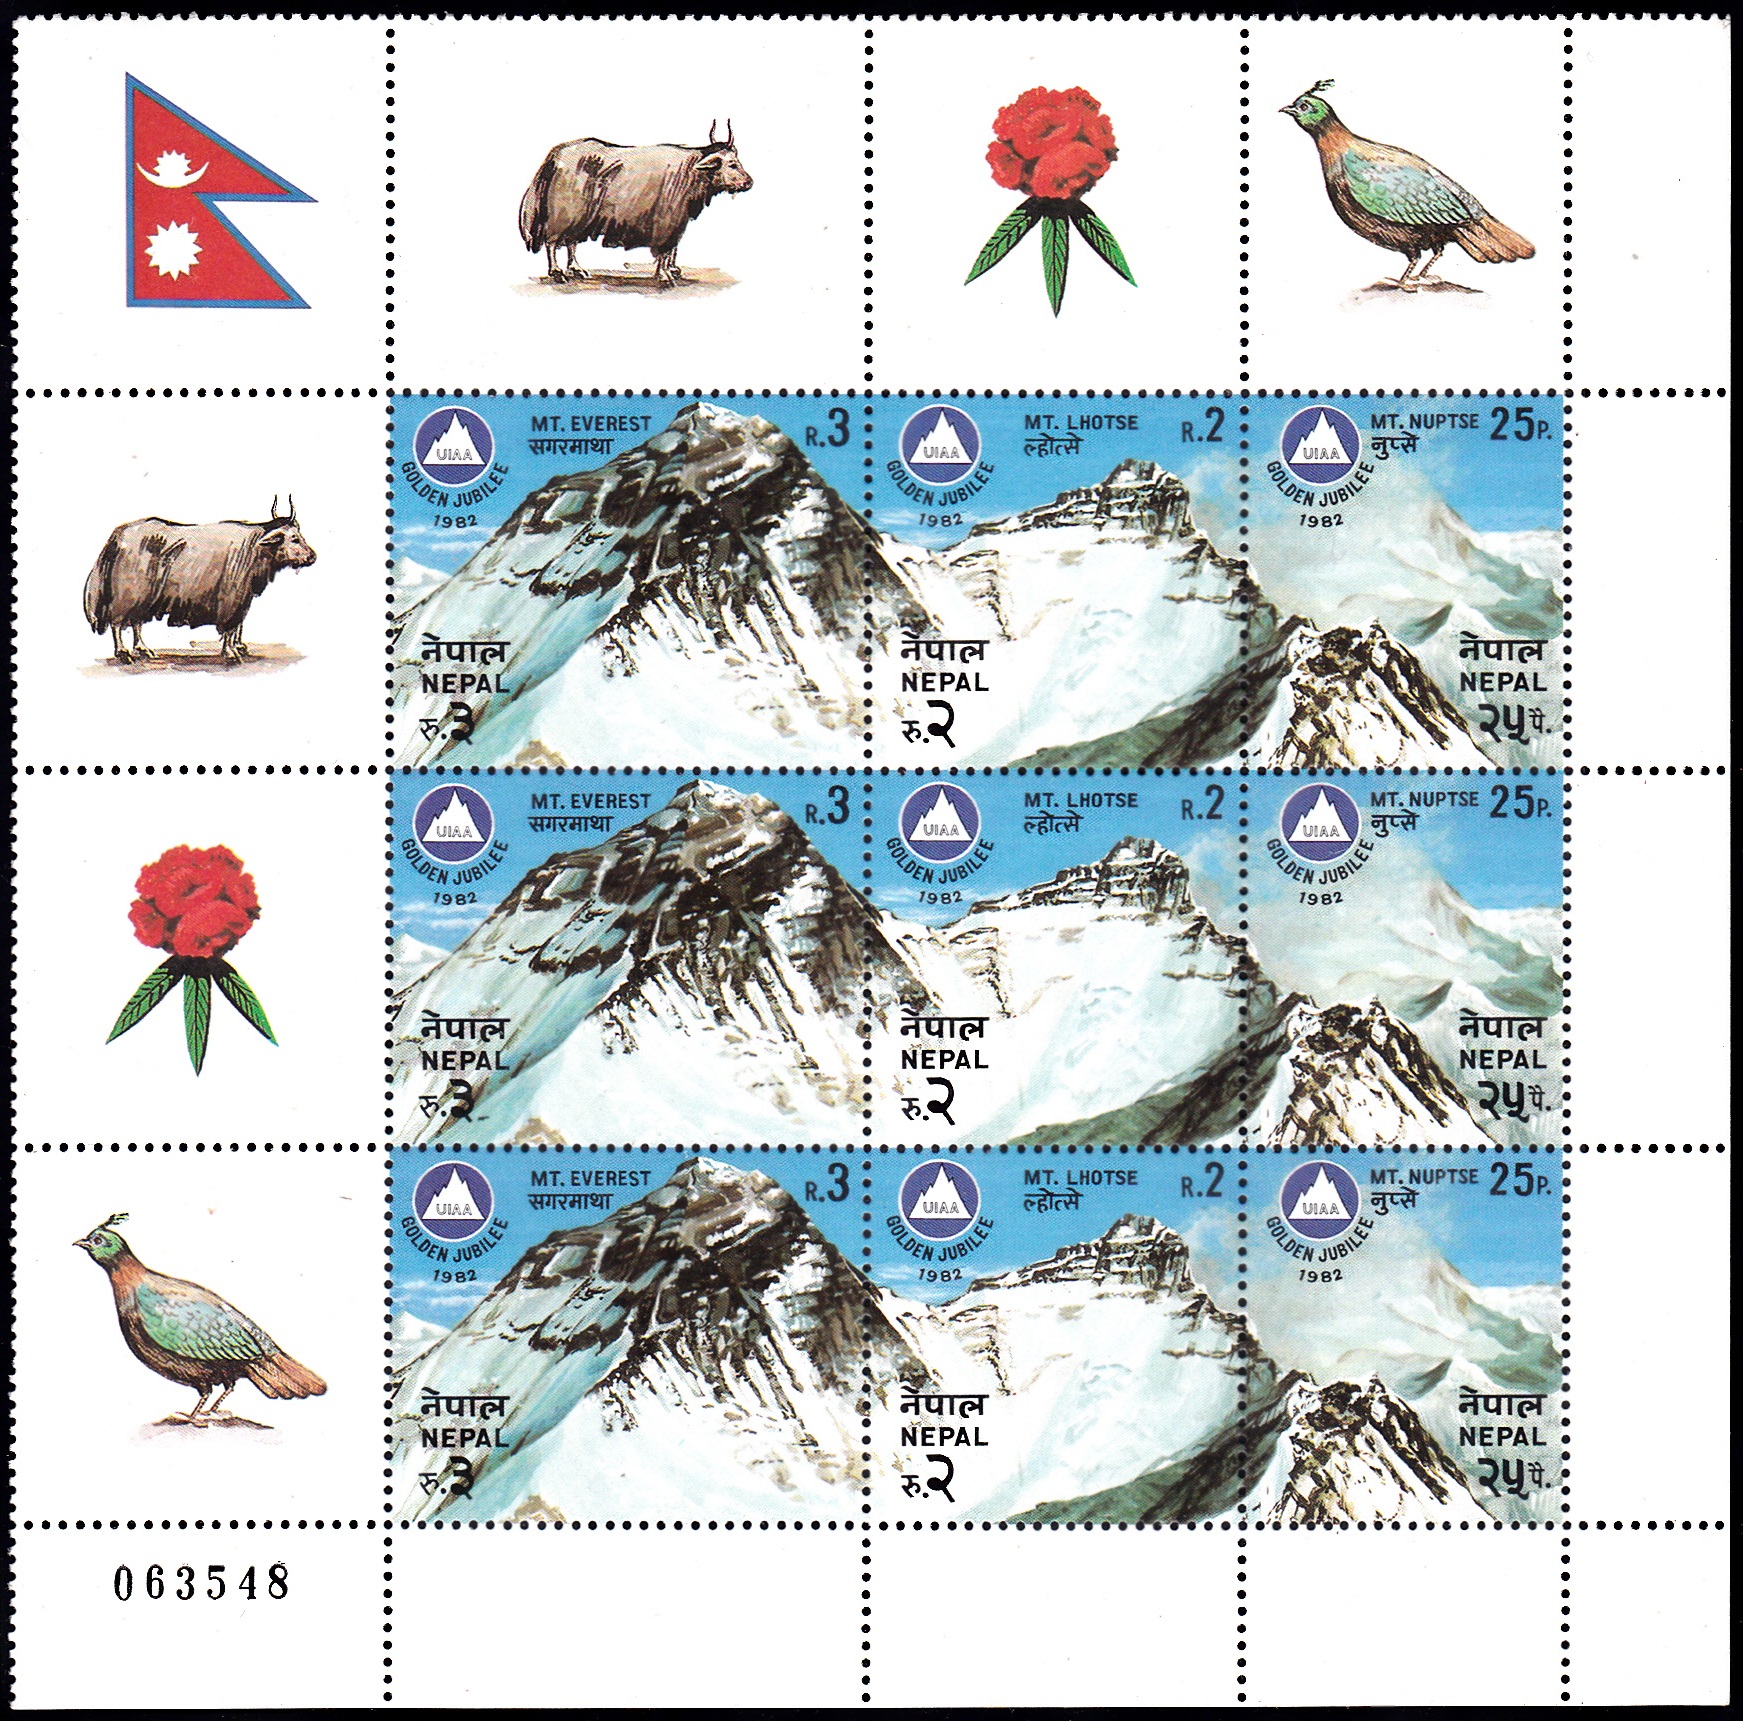 Union Internationale des Associations d'Alpinisme, Cow (national animal), rhododendron (national flower), Himalayan monal (national bird), national flag of nepal